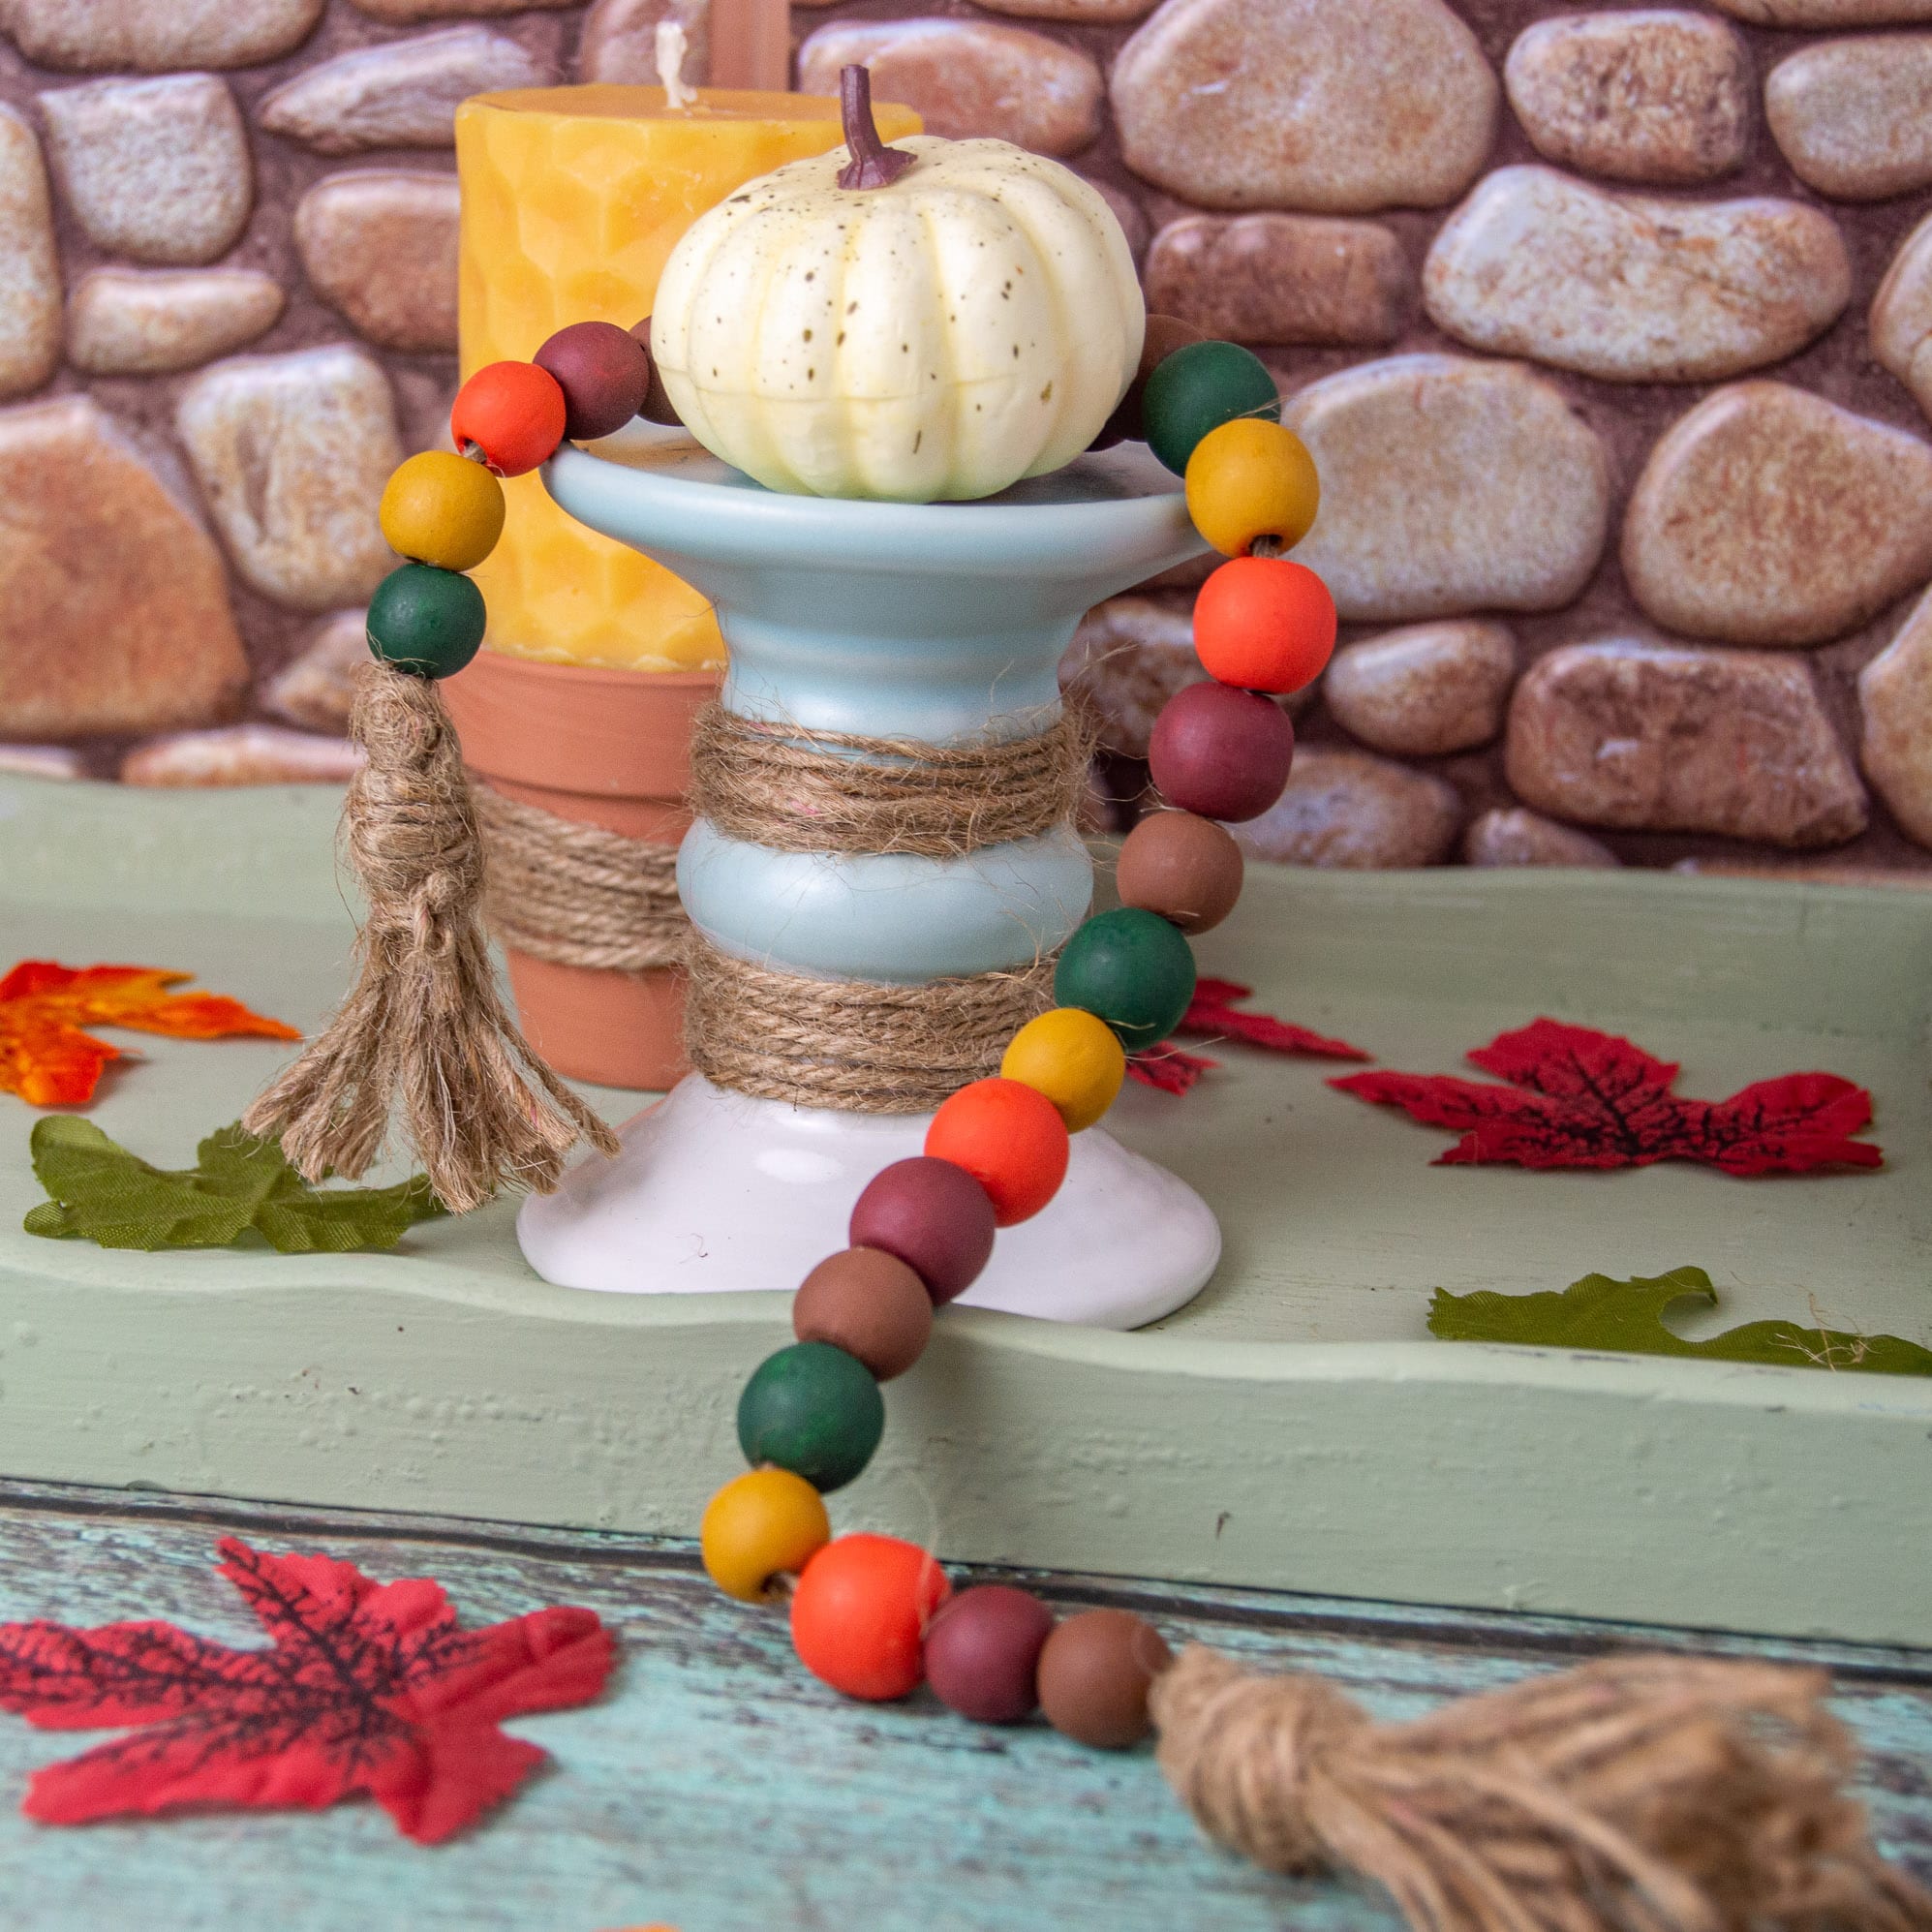 How to Make a Wood Bead Garland